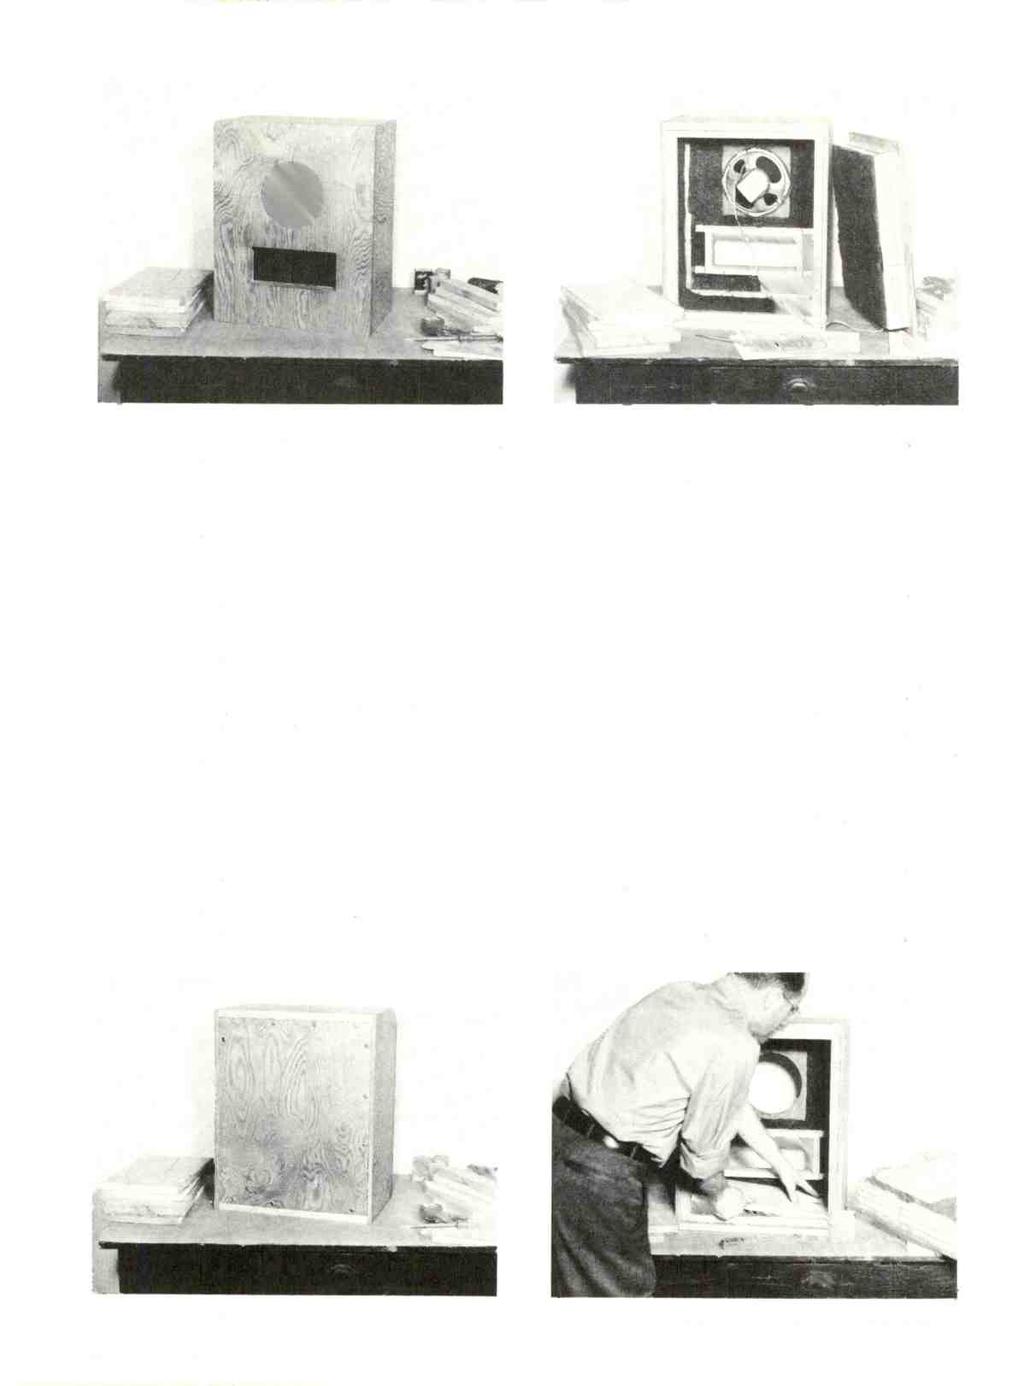 Figure 3. Front View of Reflex Enclosure Discussed in Text. Boards Used to Fill in Cabinet to Reduce Size Are Shown at Left. Figure 4. Interior View of Enclosure.